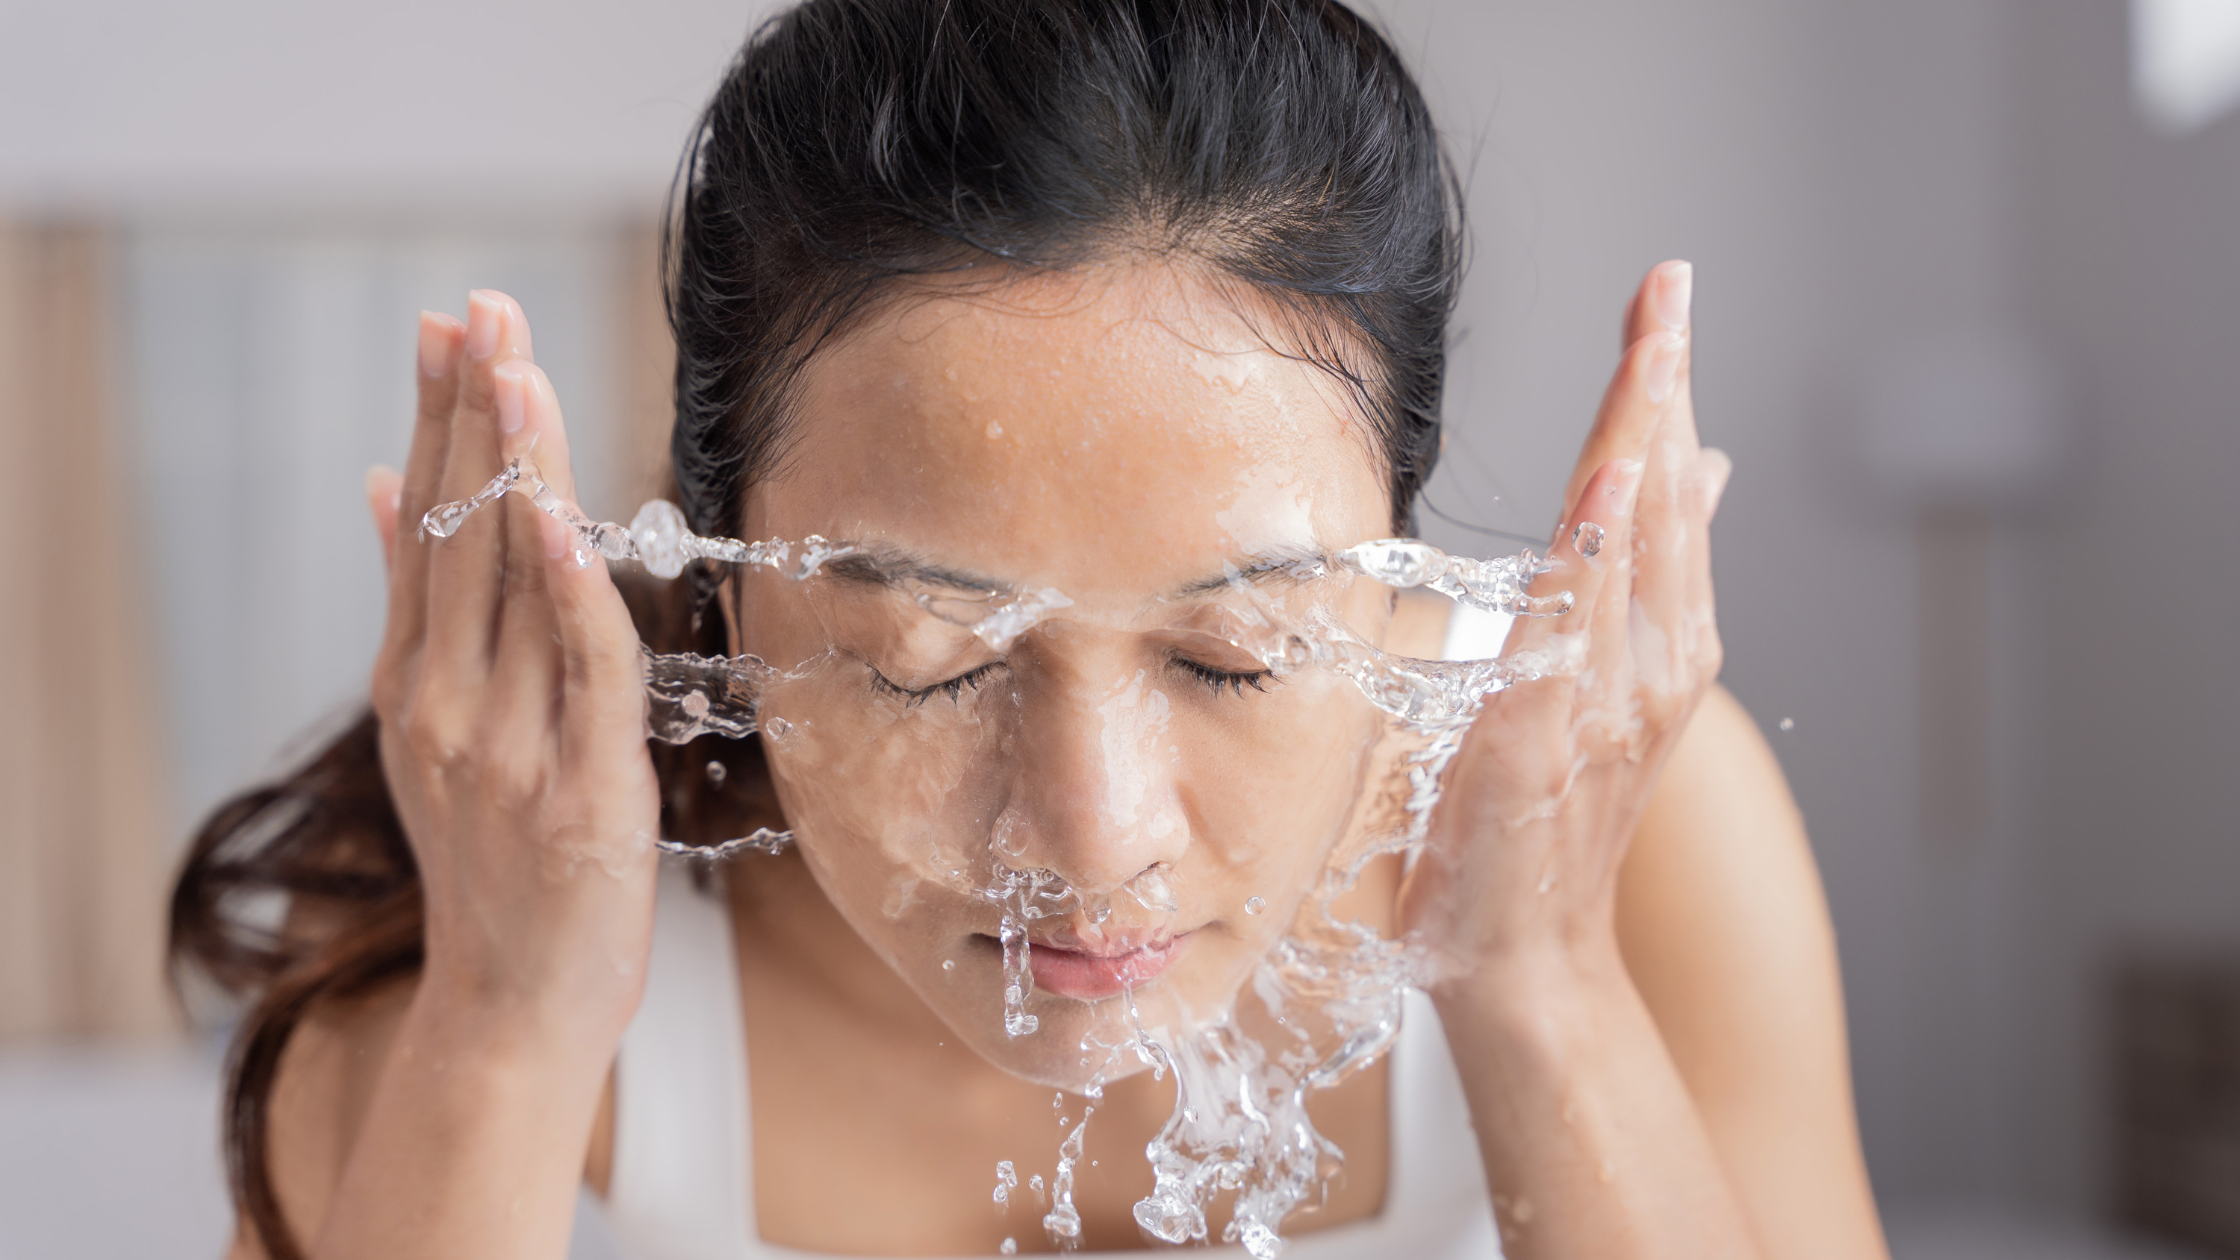 Washing your face with soap to manage acne